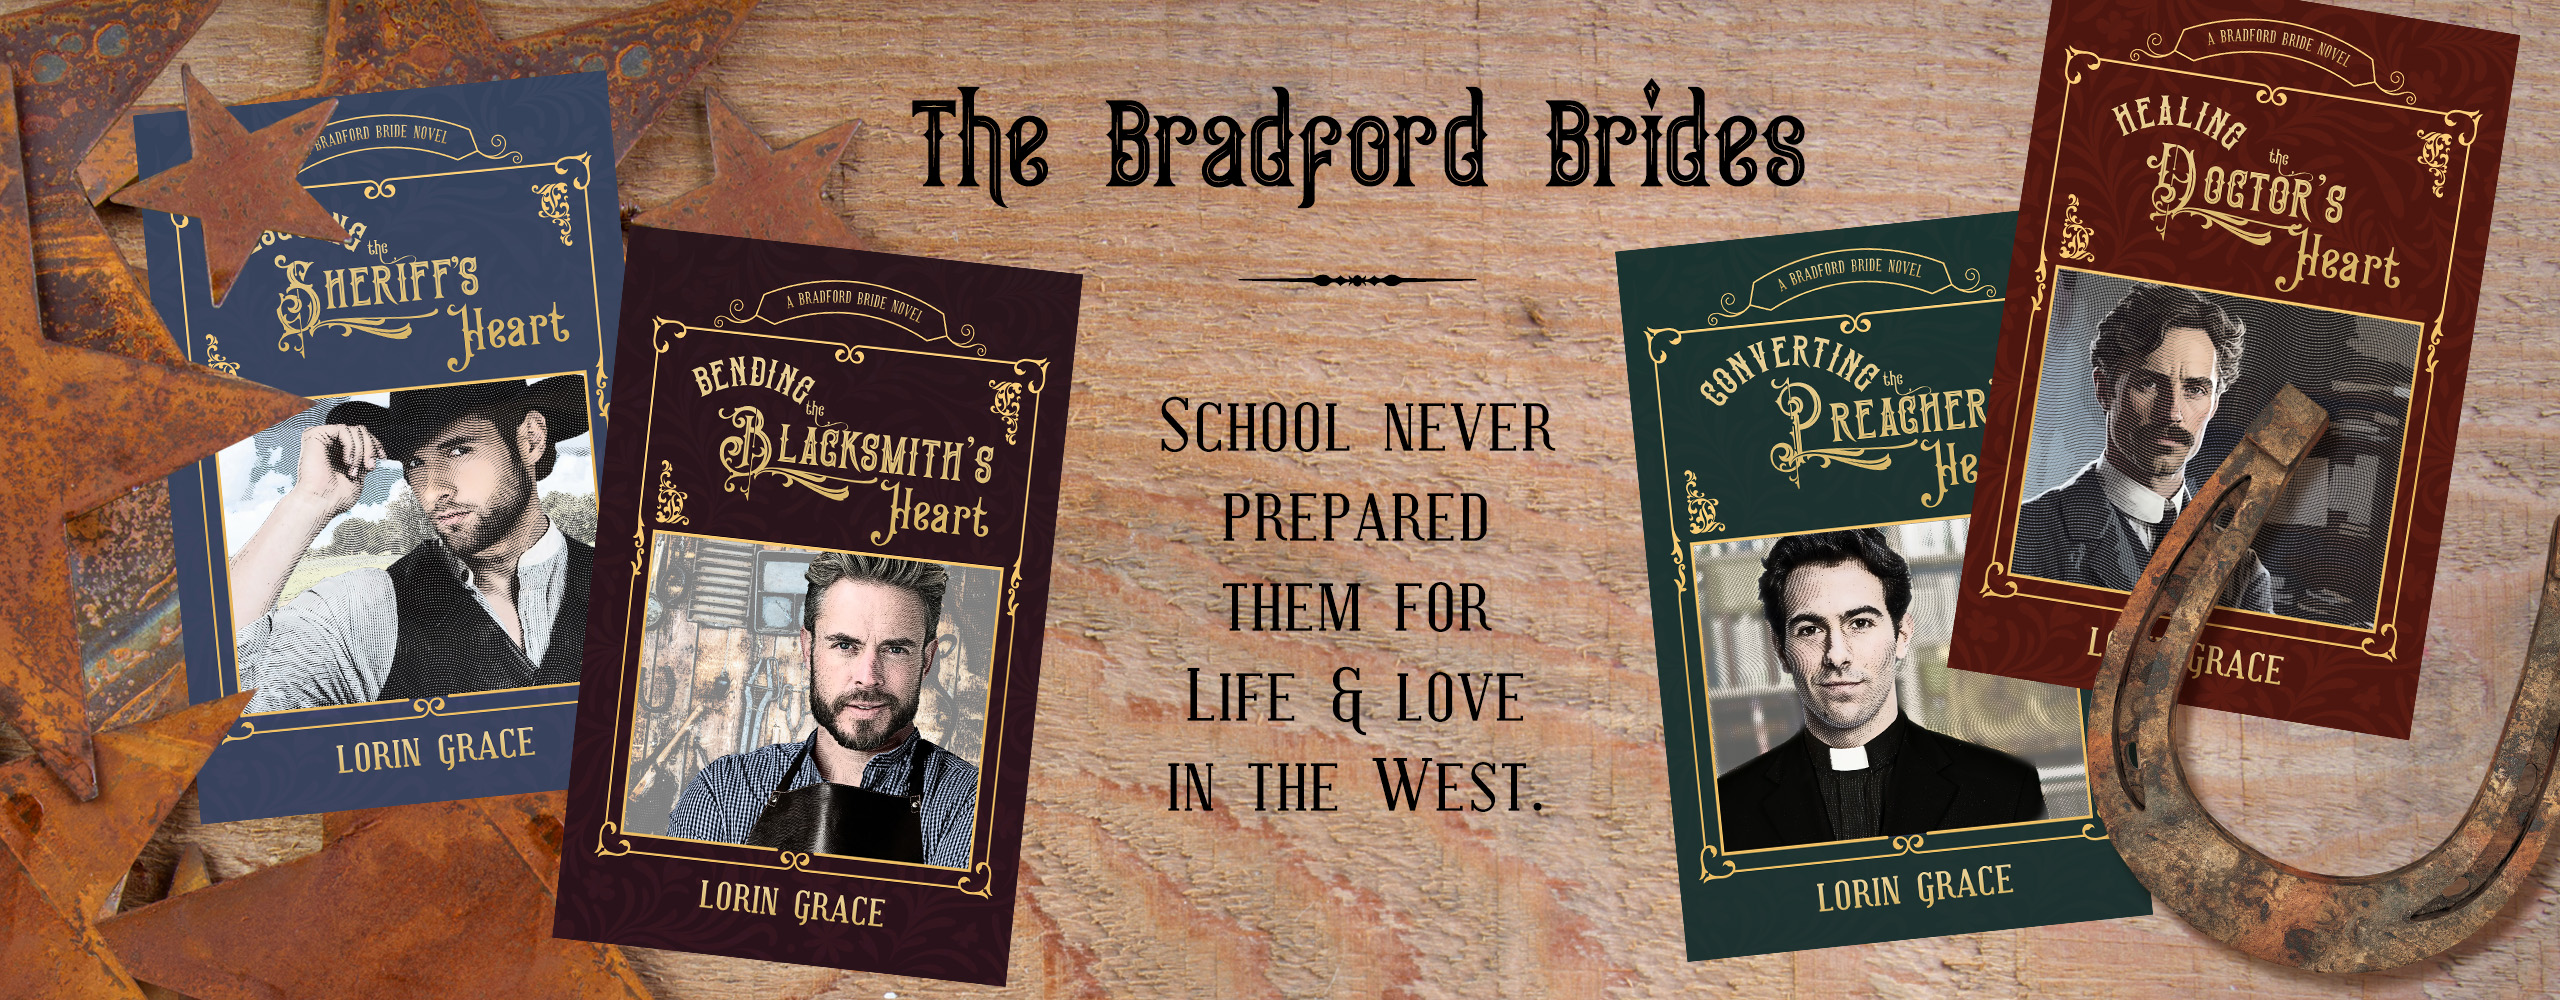 Banner showing all of the Bradford Brides books